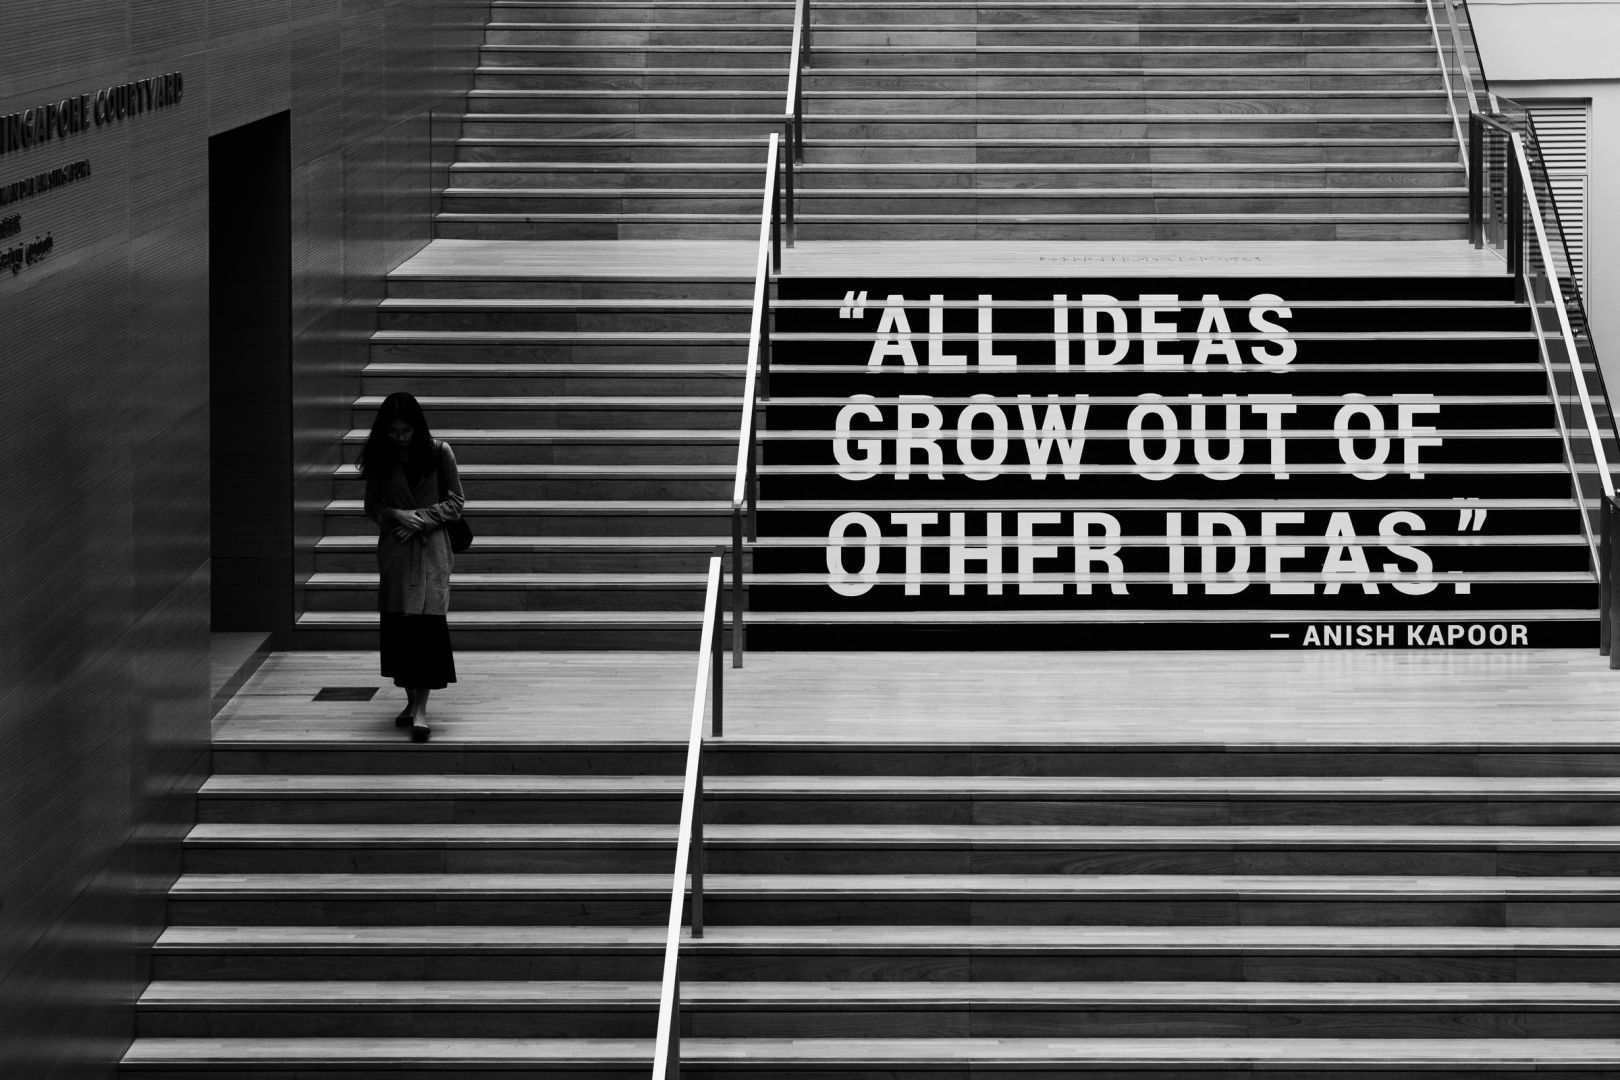 All Ideas Grow Out Of Other Ideas